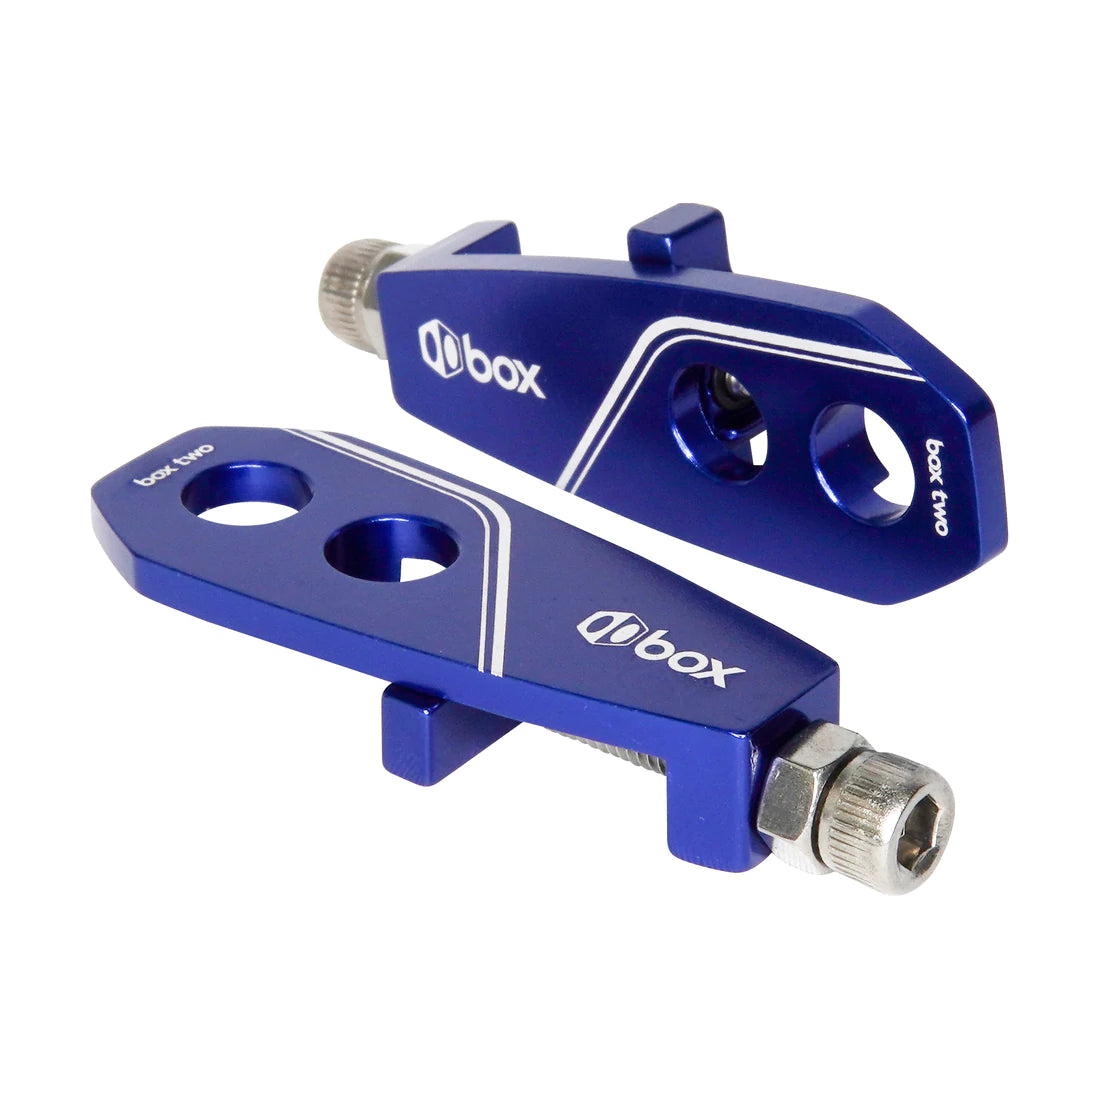 Box Two 3/8" BMX Chain Tensioners - Pair - Blue